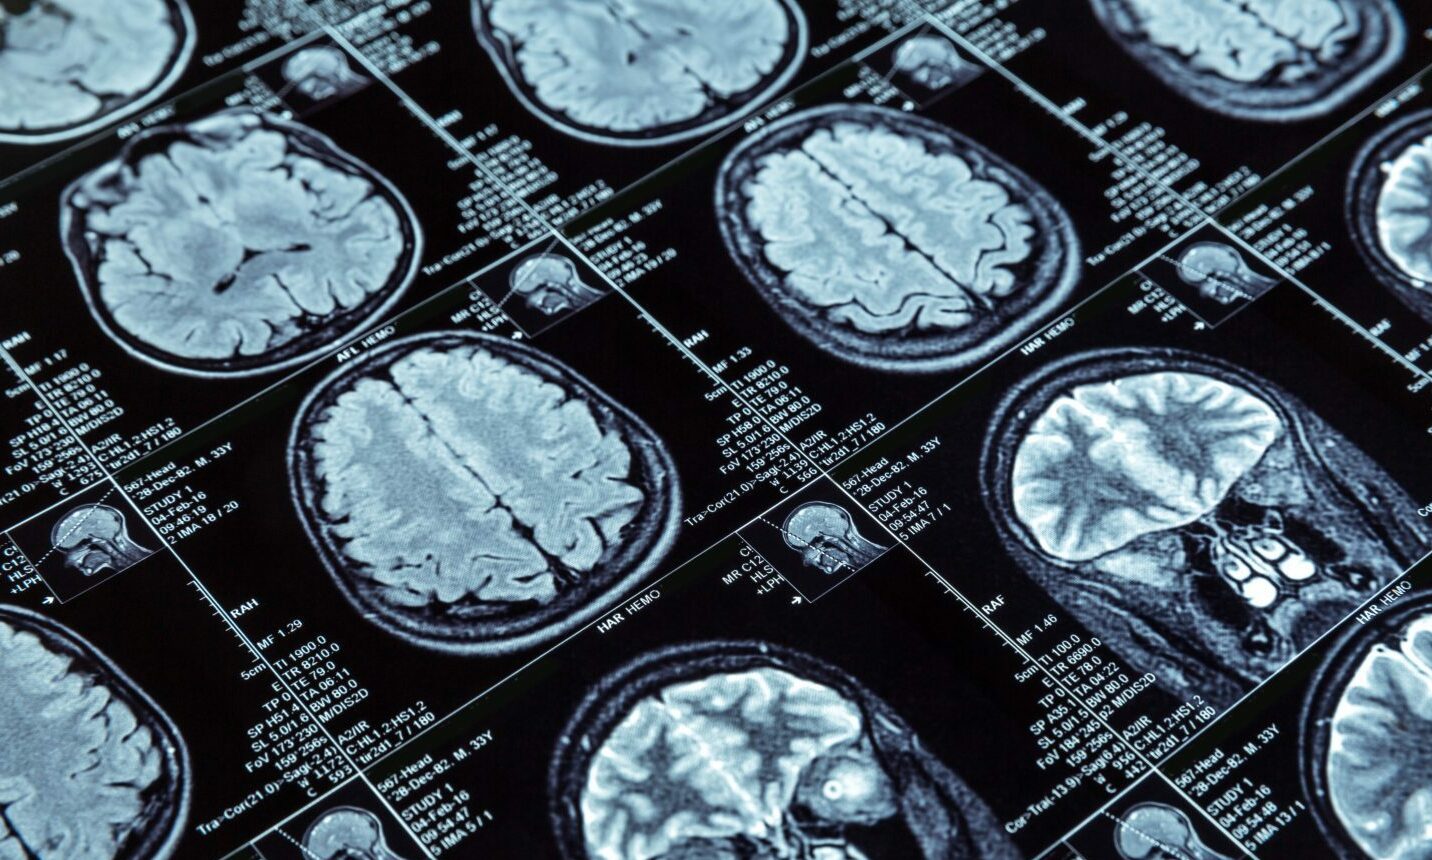 Billy was given a brain scan as part of his diagnosis. Image: Shutterstock / Nomad_Soul